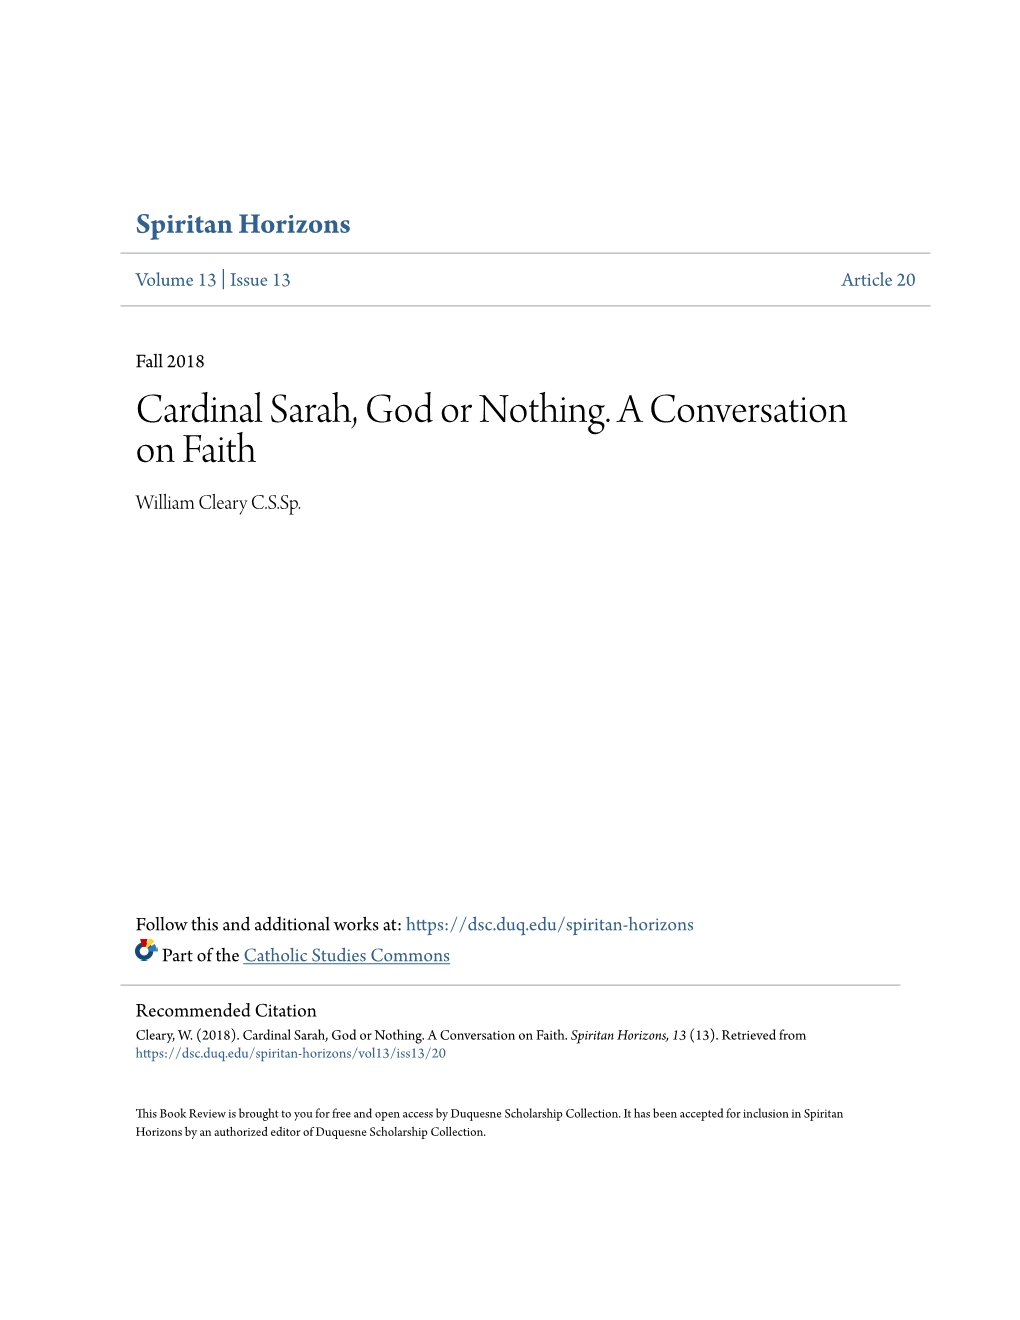 Cardinal Sarah, God Or Nothing. a Conversation on Faith William Cleary C.S.Sp